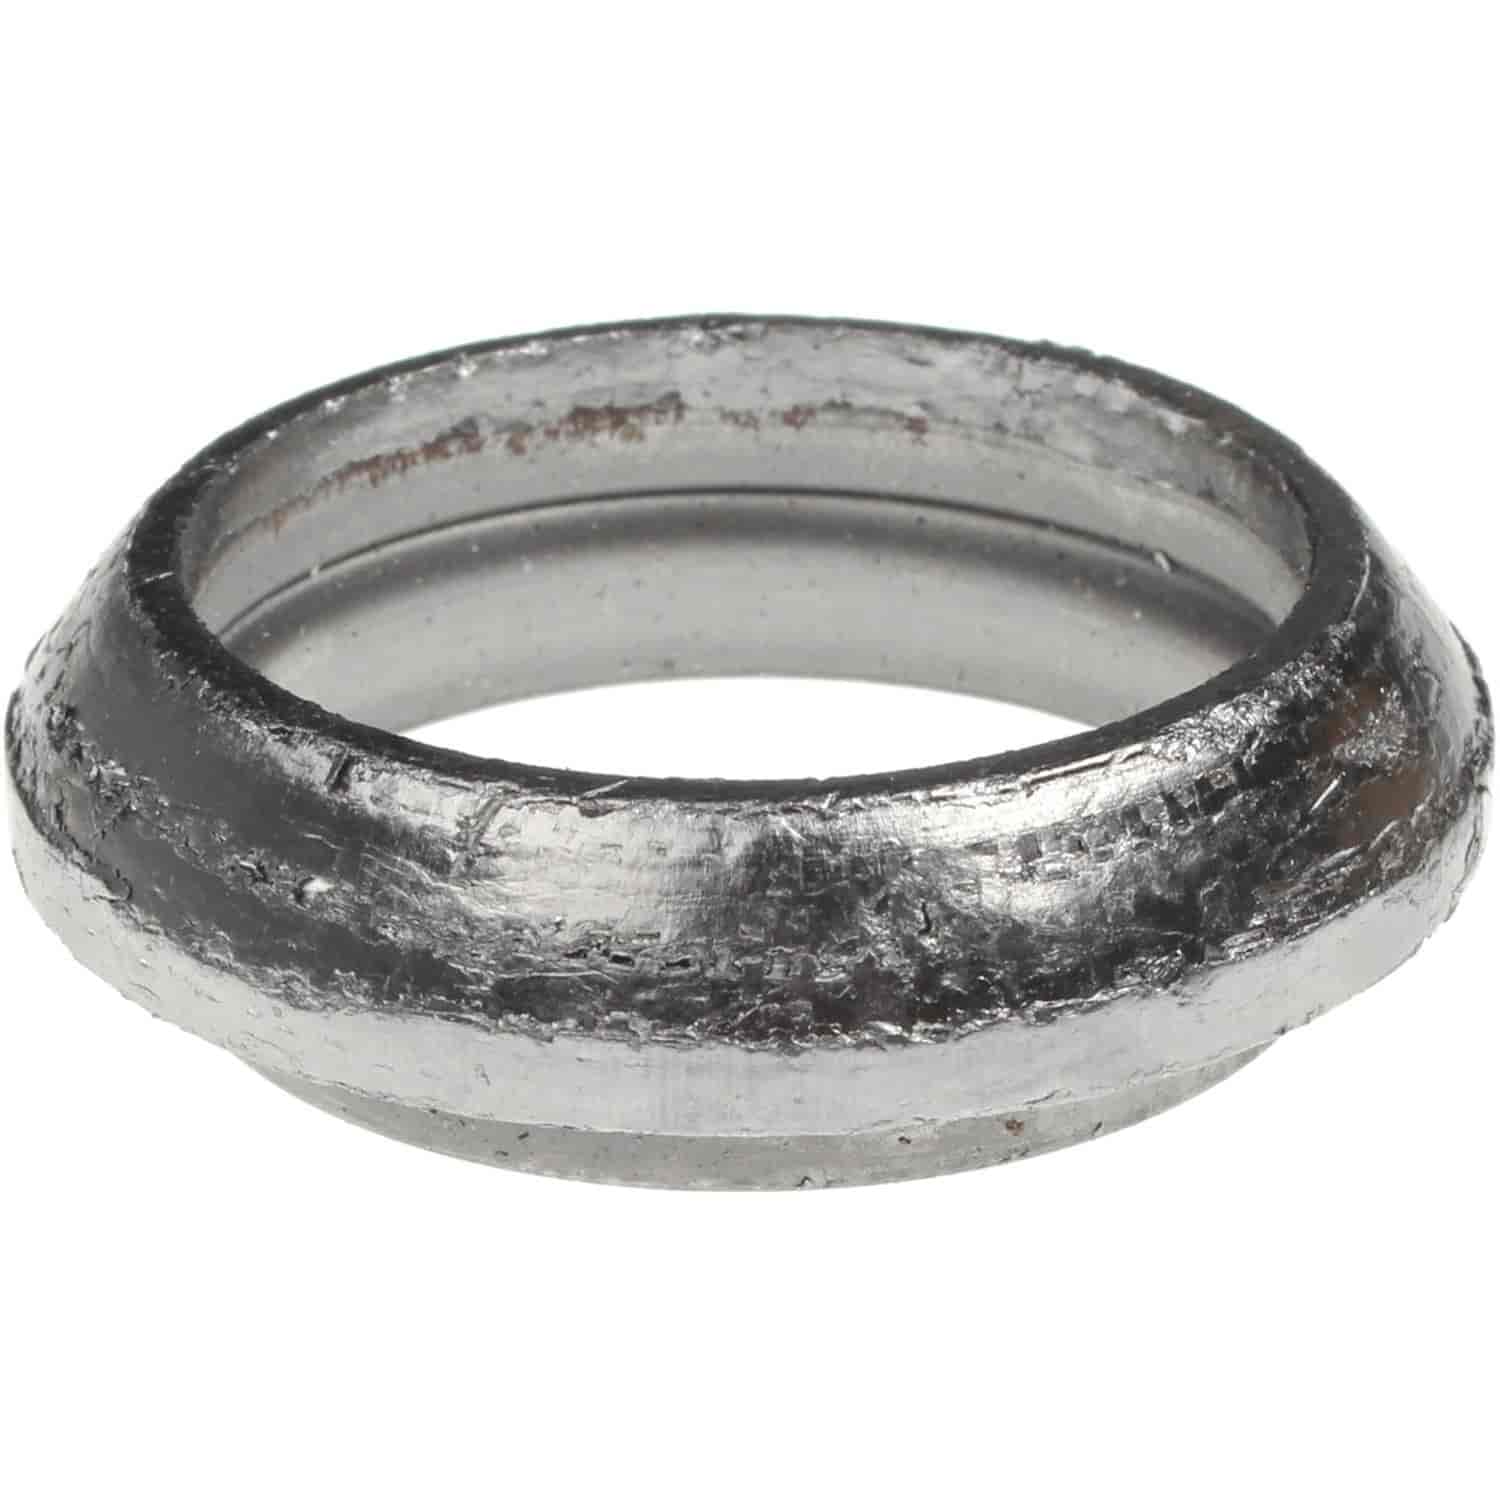 Exhaust Pipe Packing Ring AMC Jeep 121 2.0L 196 199 232 3.8L 258 290 304 5.0L 343 360 390 401 64-8